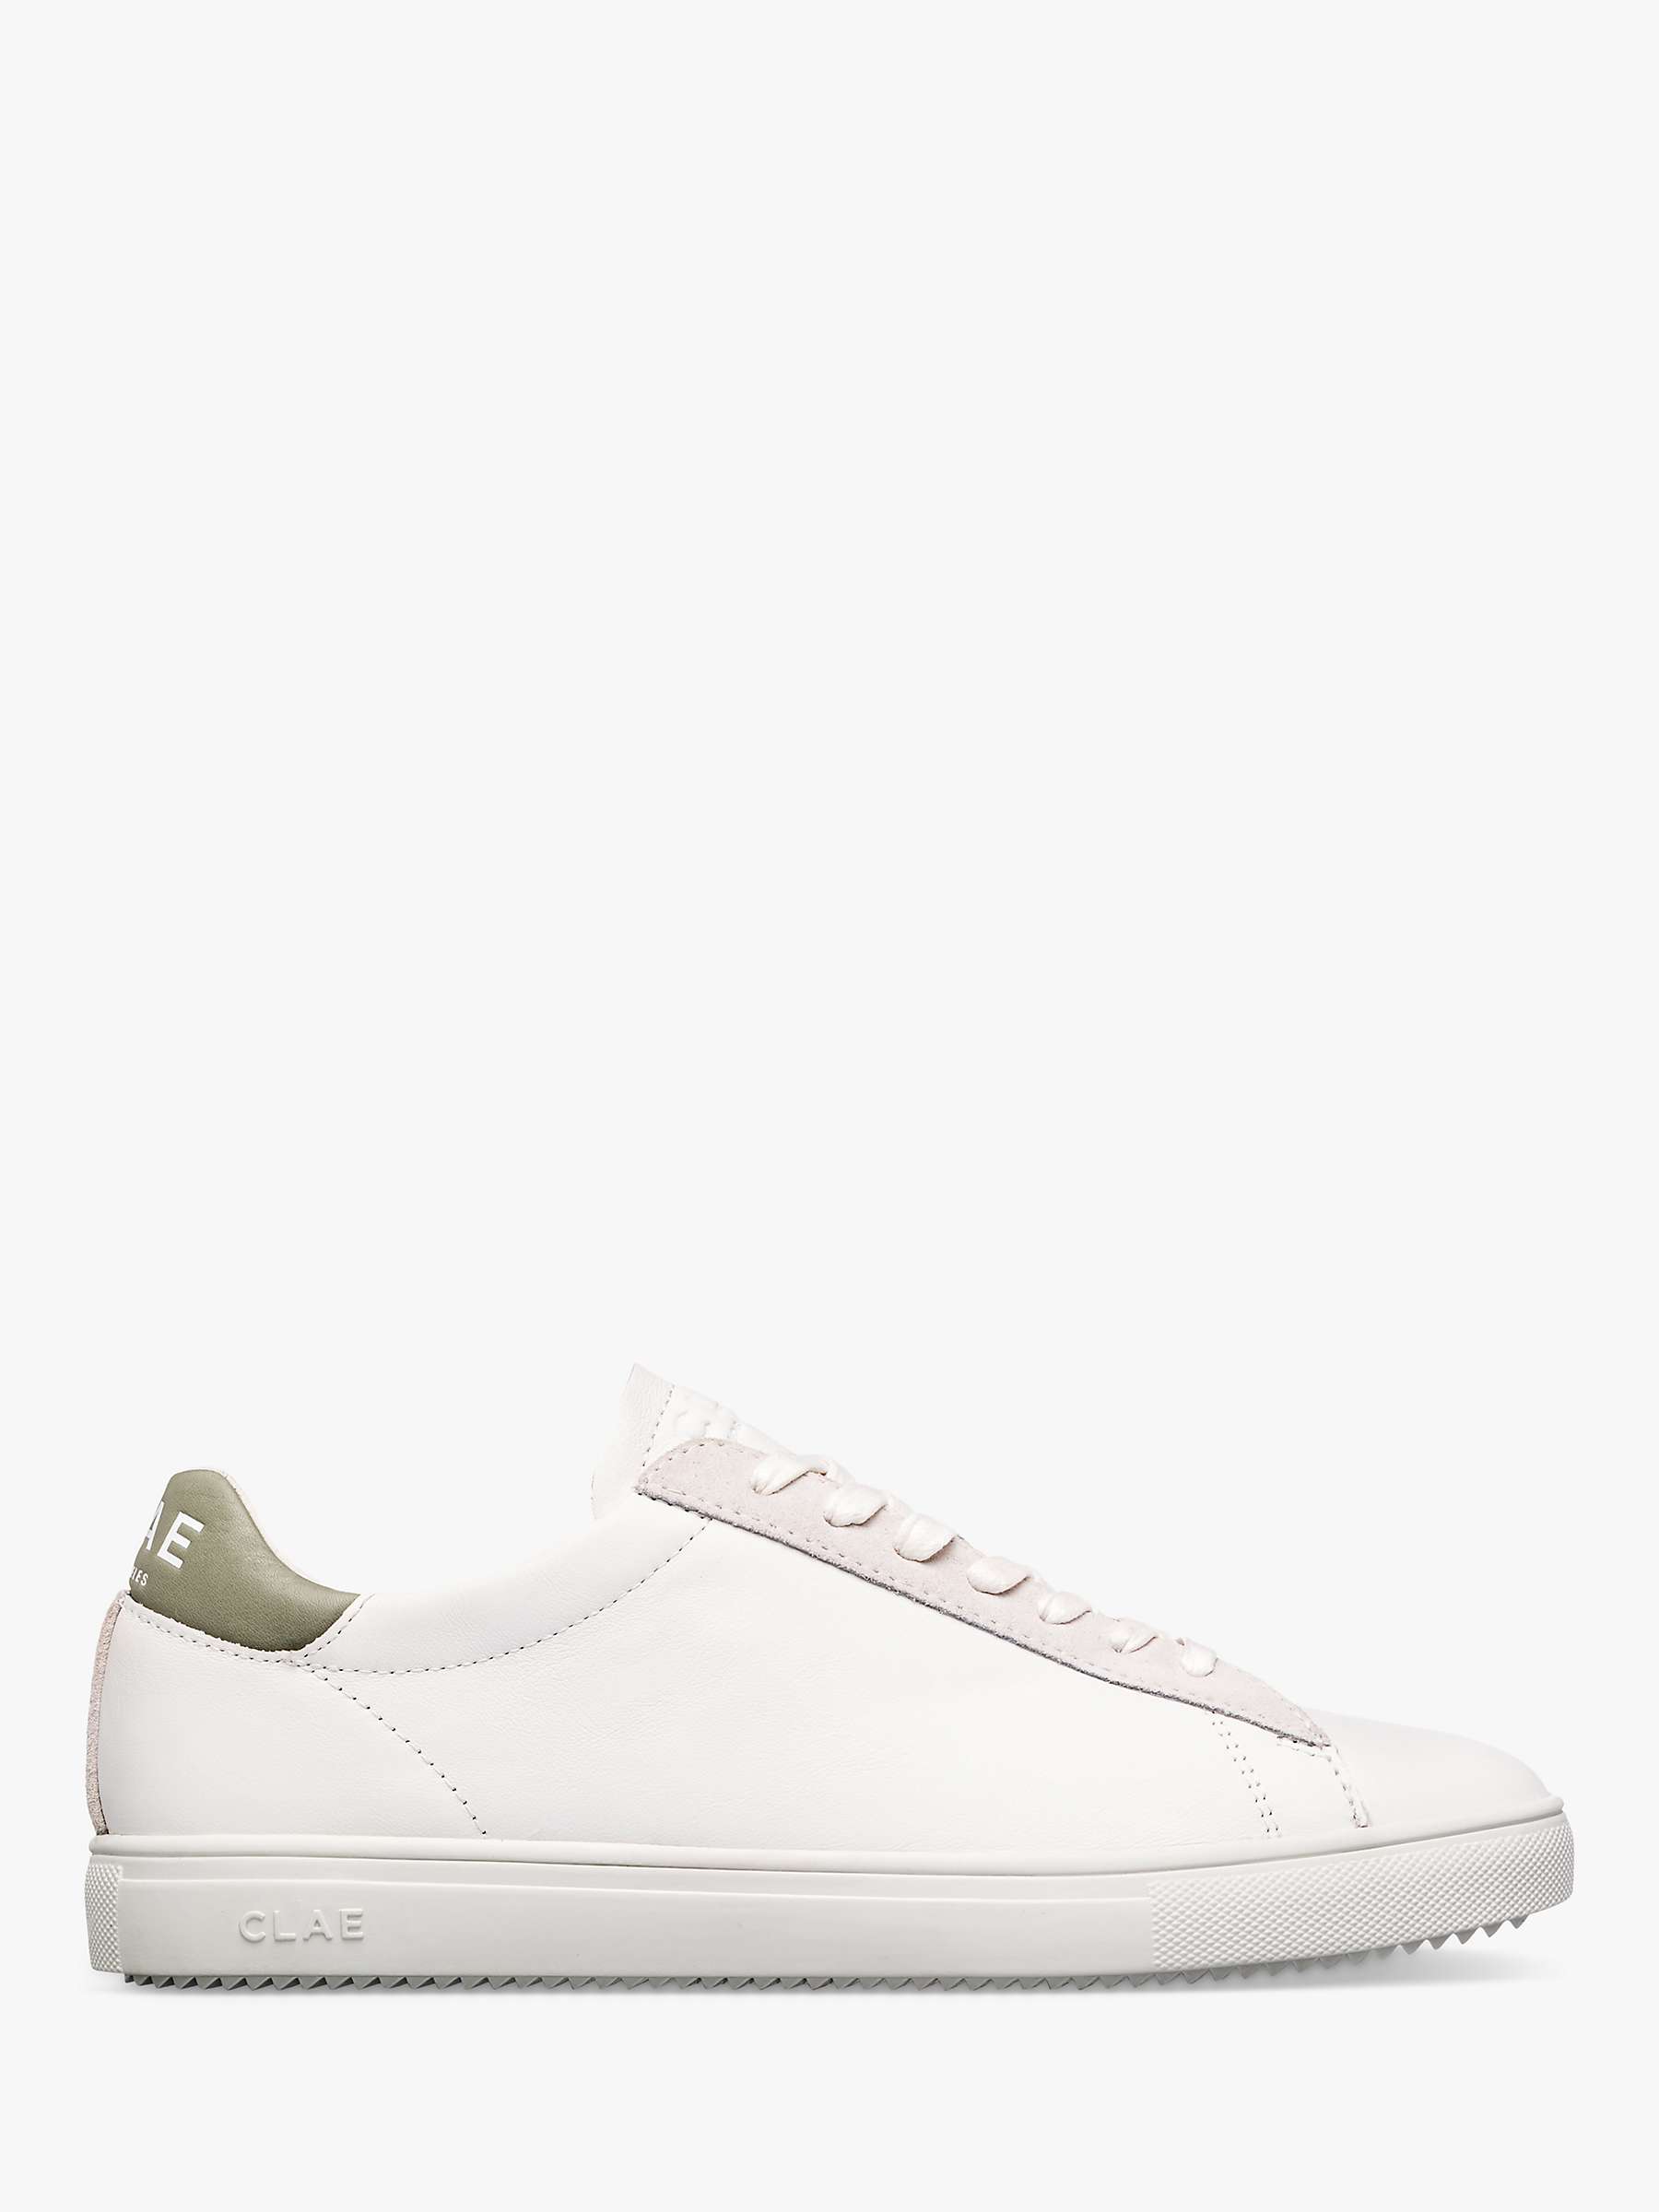 Buy CLAE Bradley Whitel Lace Up Trainers, White Online at johnlewis.com